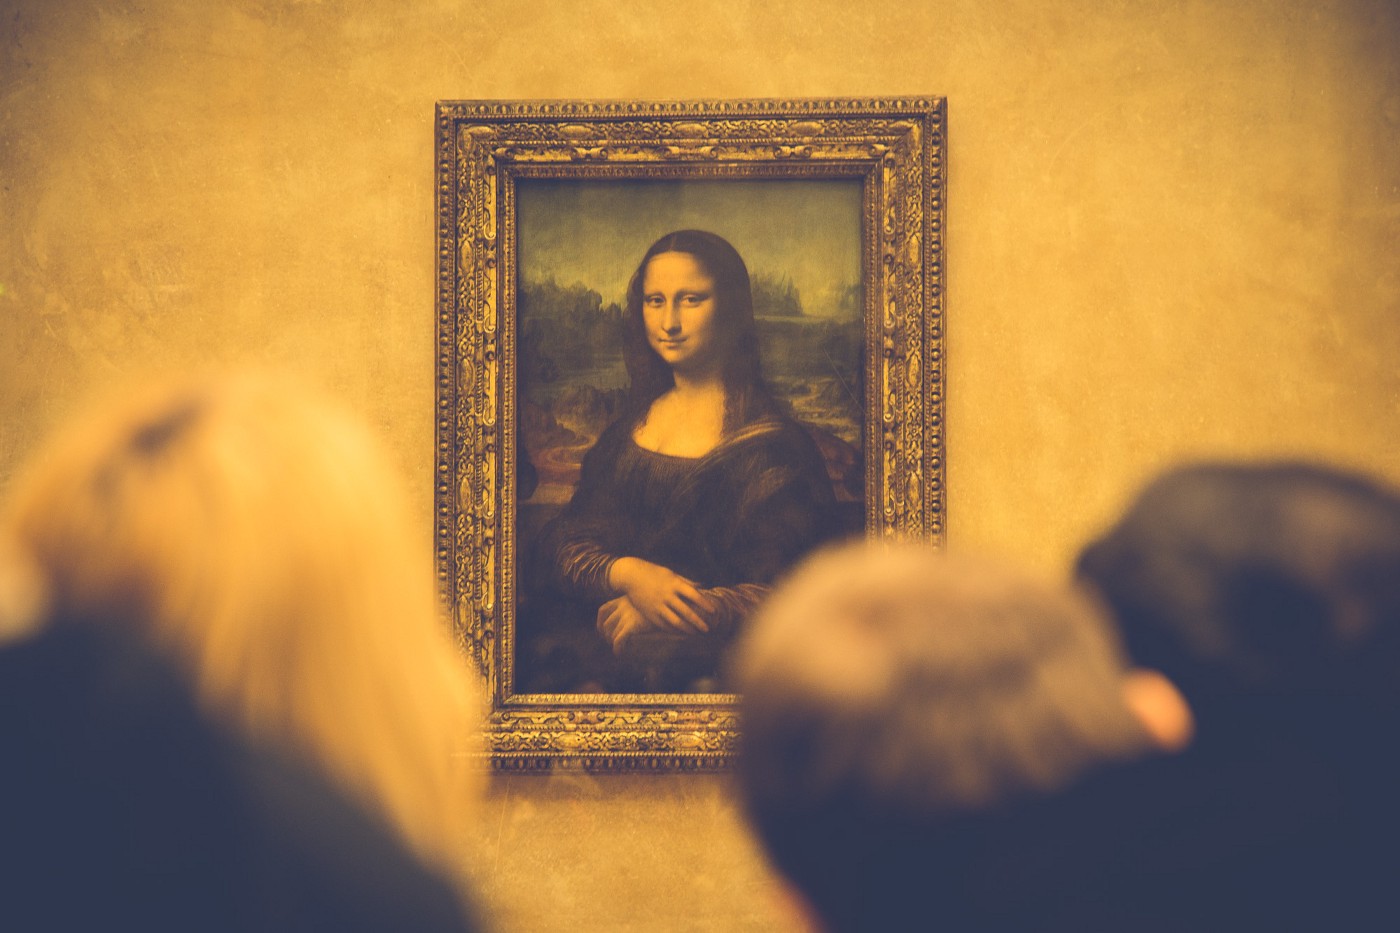 Why is Monalisa so famous?